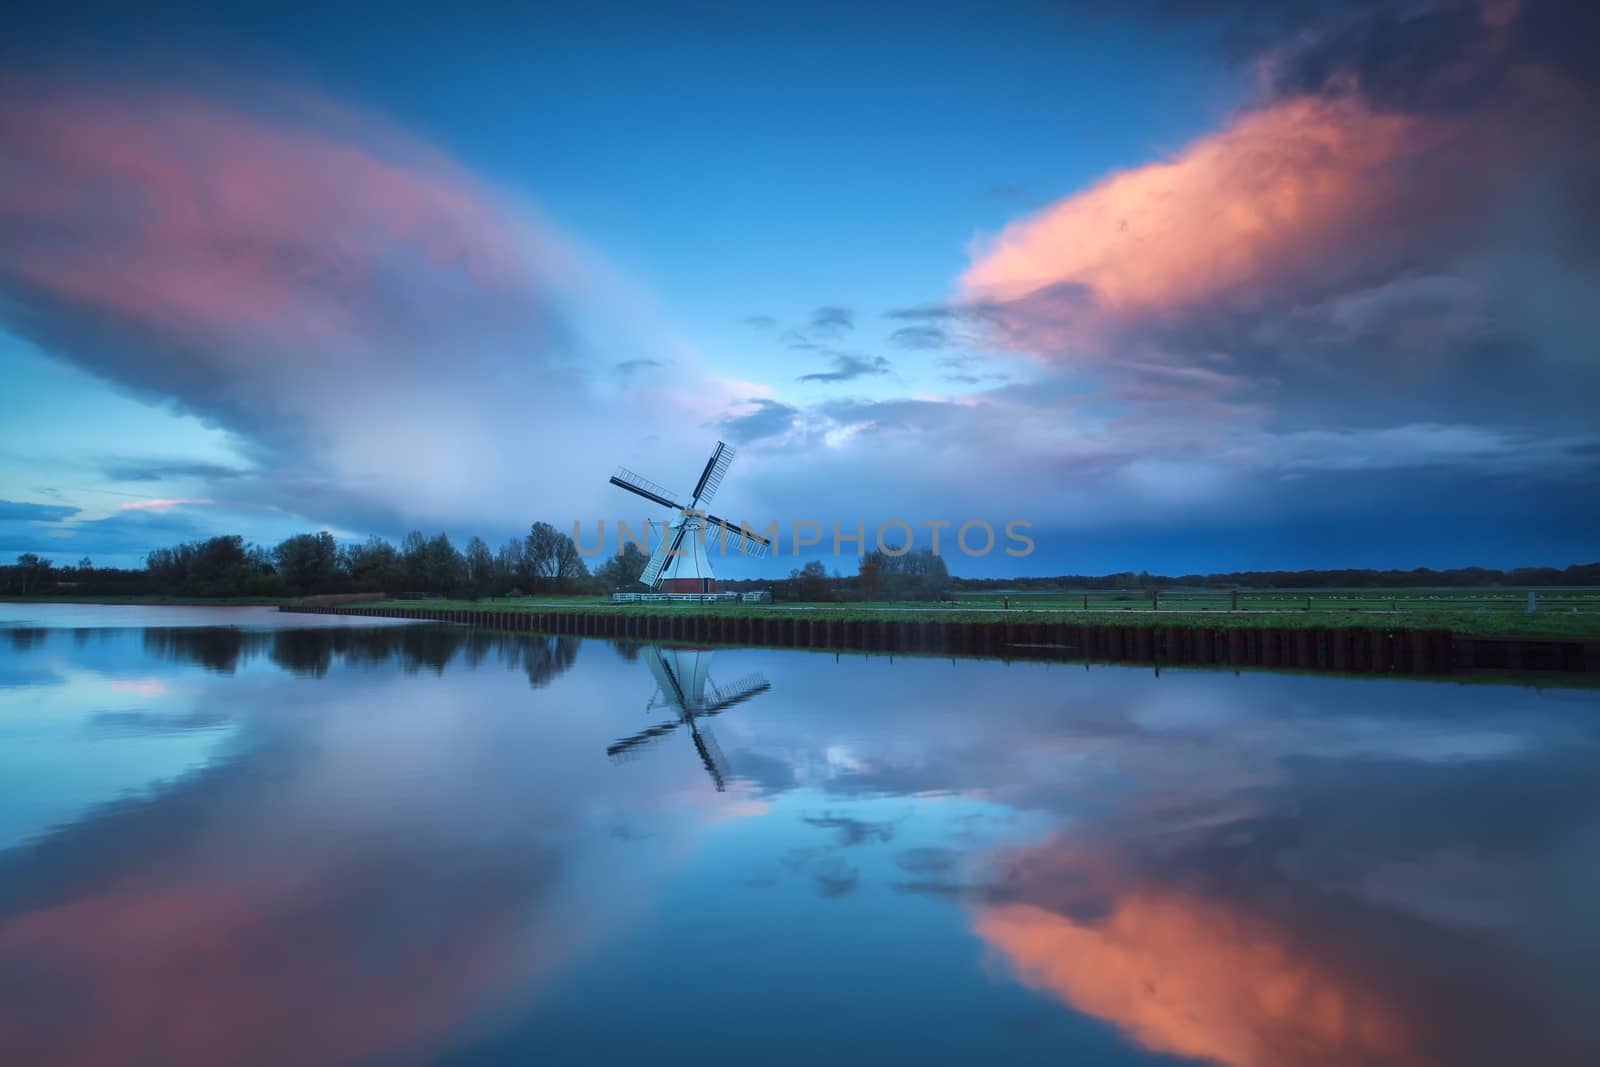 dramatic stormy sunset over Dutch windmill and river, Groningen, Netherlands